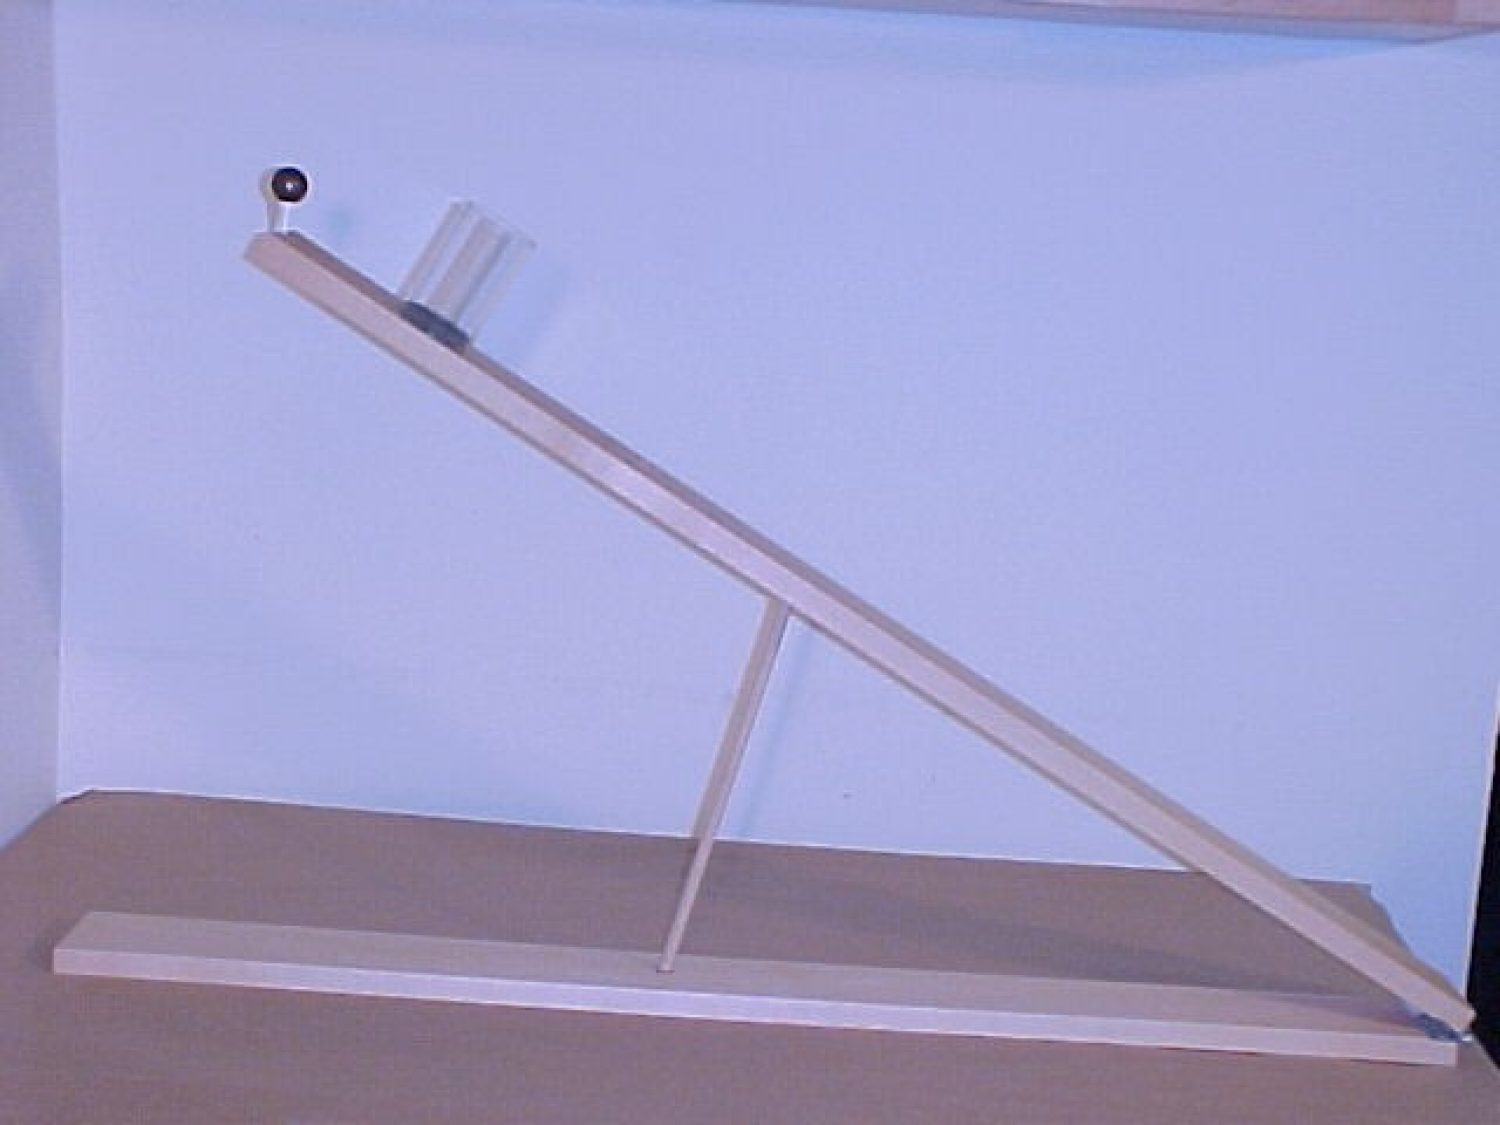 Hinged Stick and falling Ball